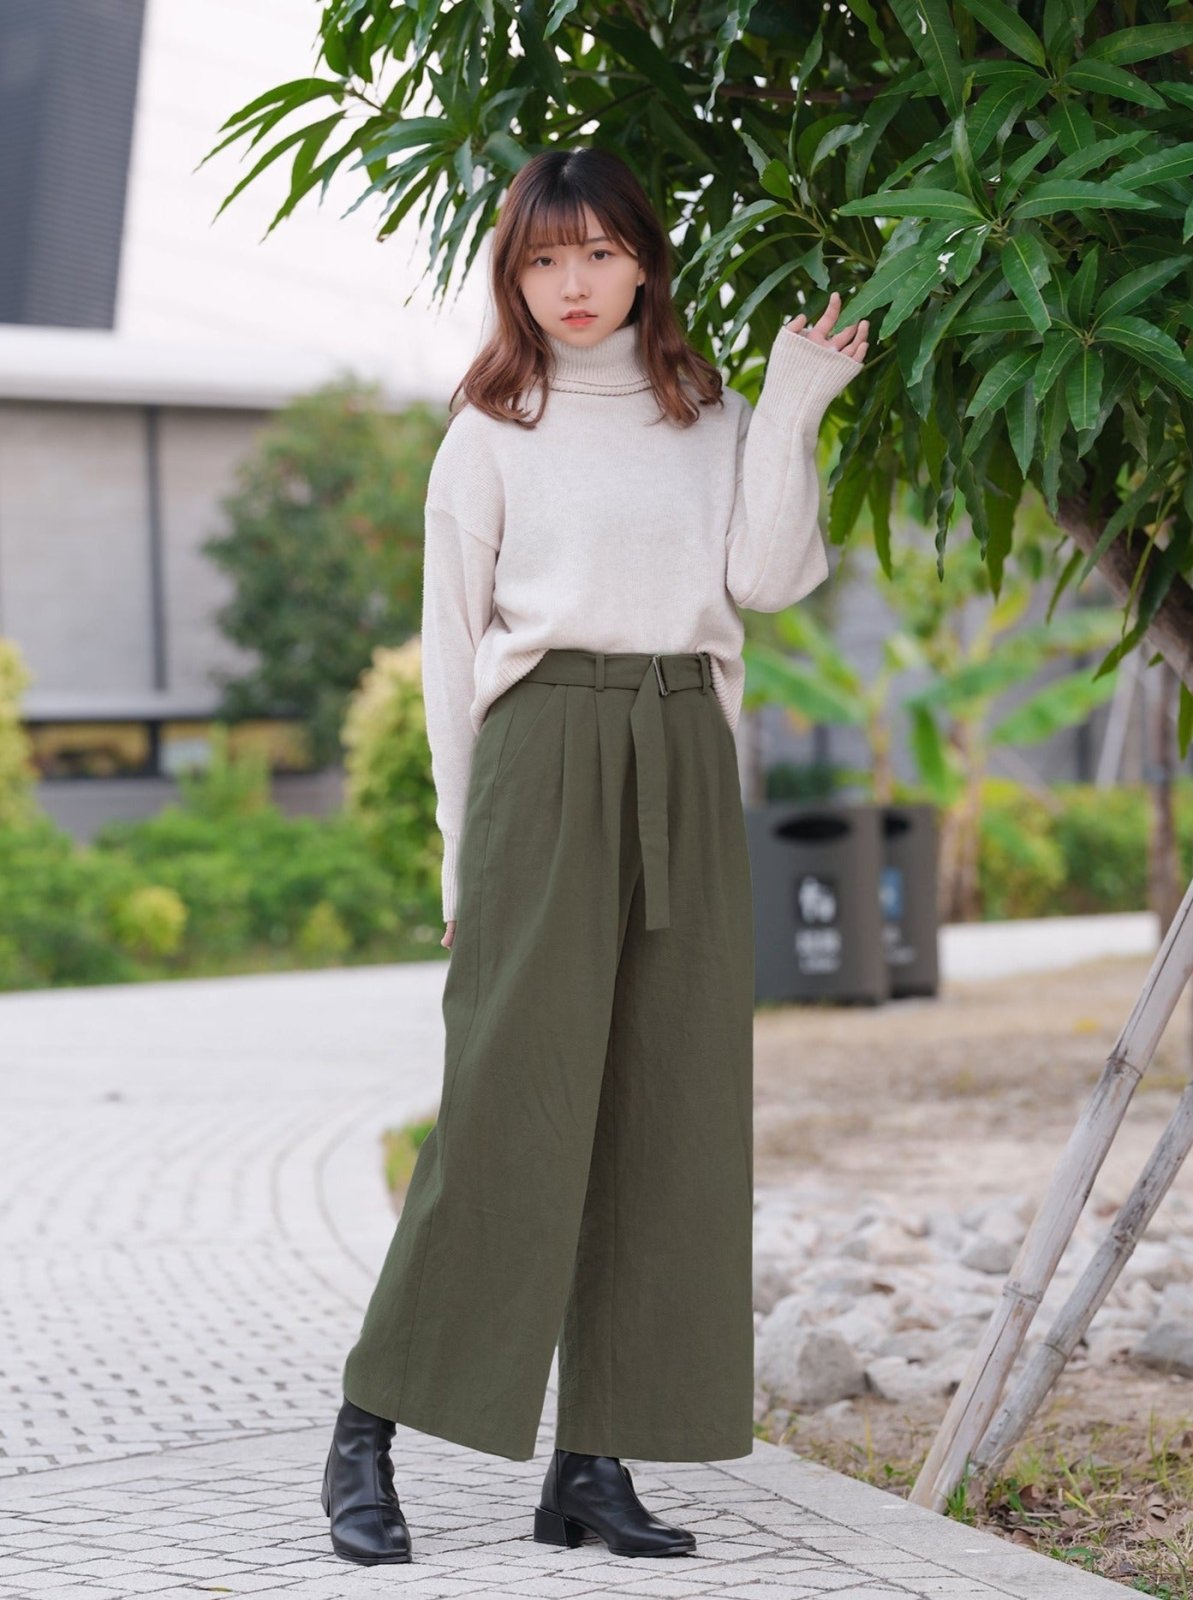 Belted Wide Leg Pants FOREST - DAG-DD8811-21ForestS - Matcha Green - S - D'ZAGE Designs